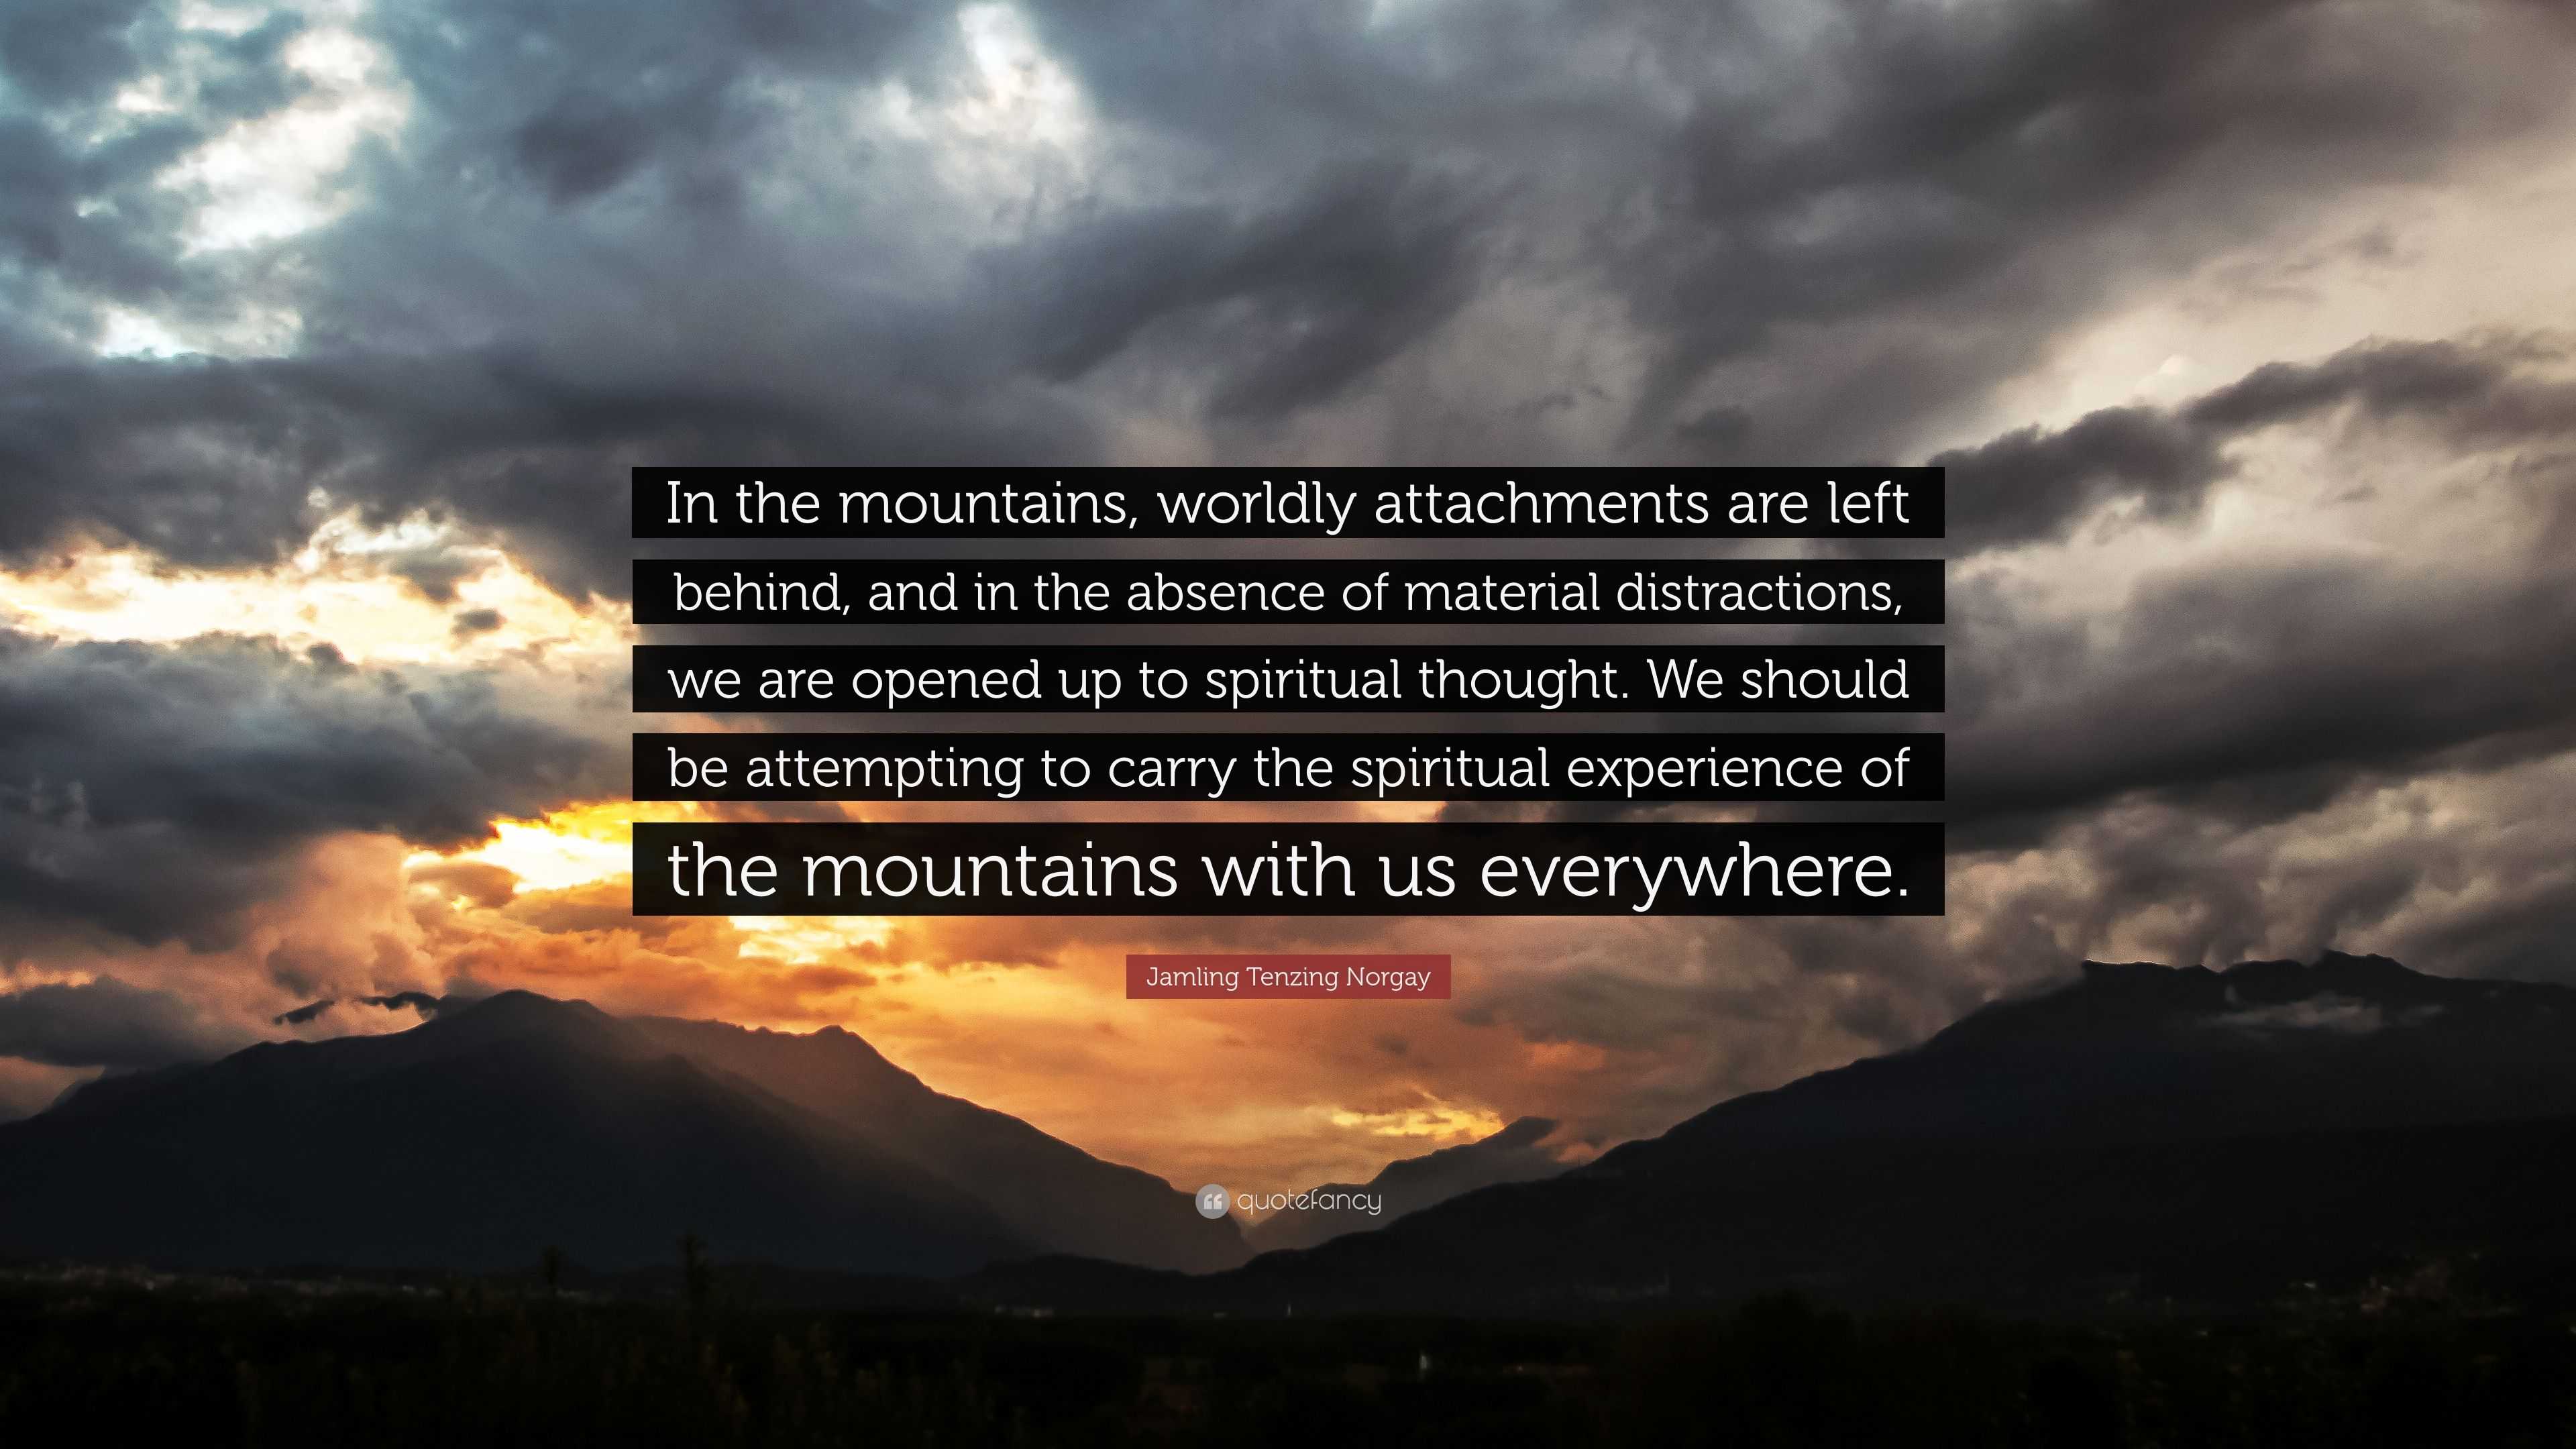 Jamling Tenzing Norgay Quote: “In the mountains, worldly attachments ...